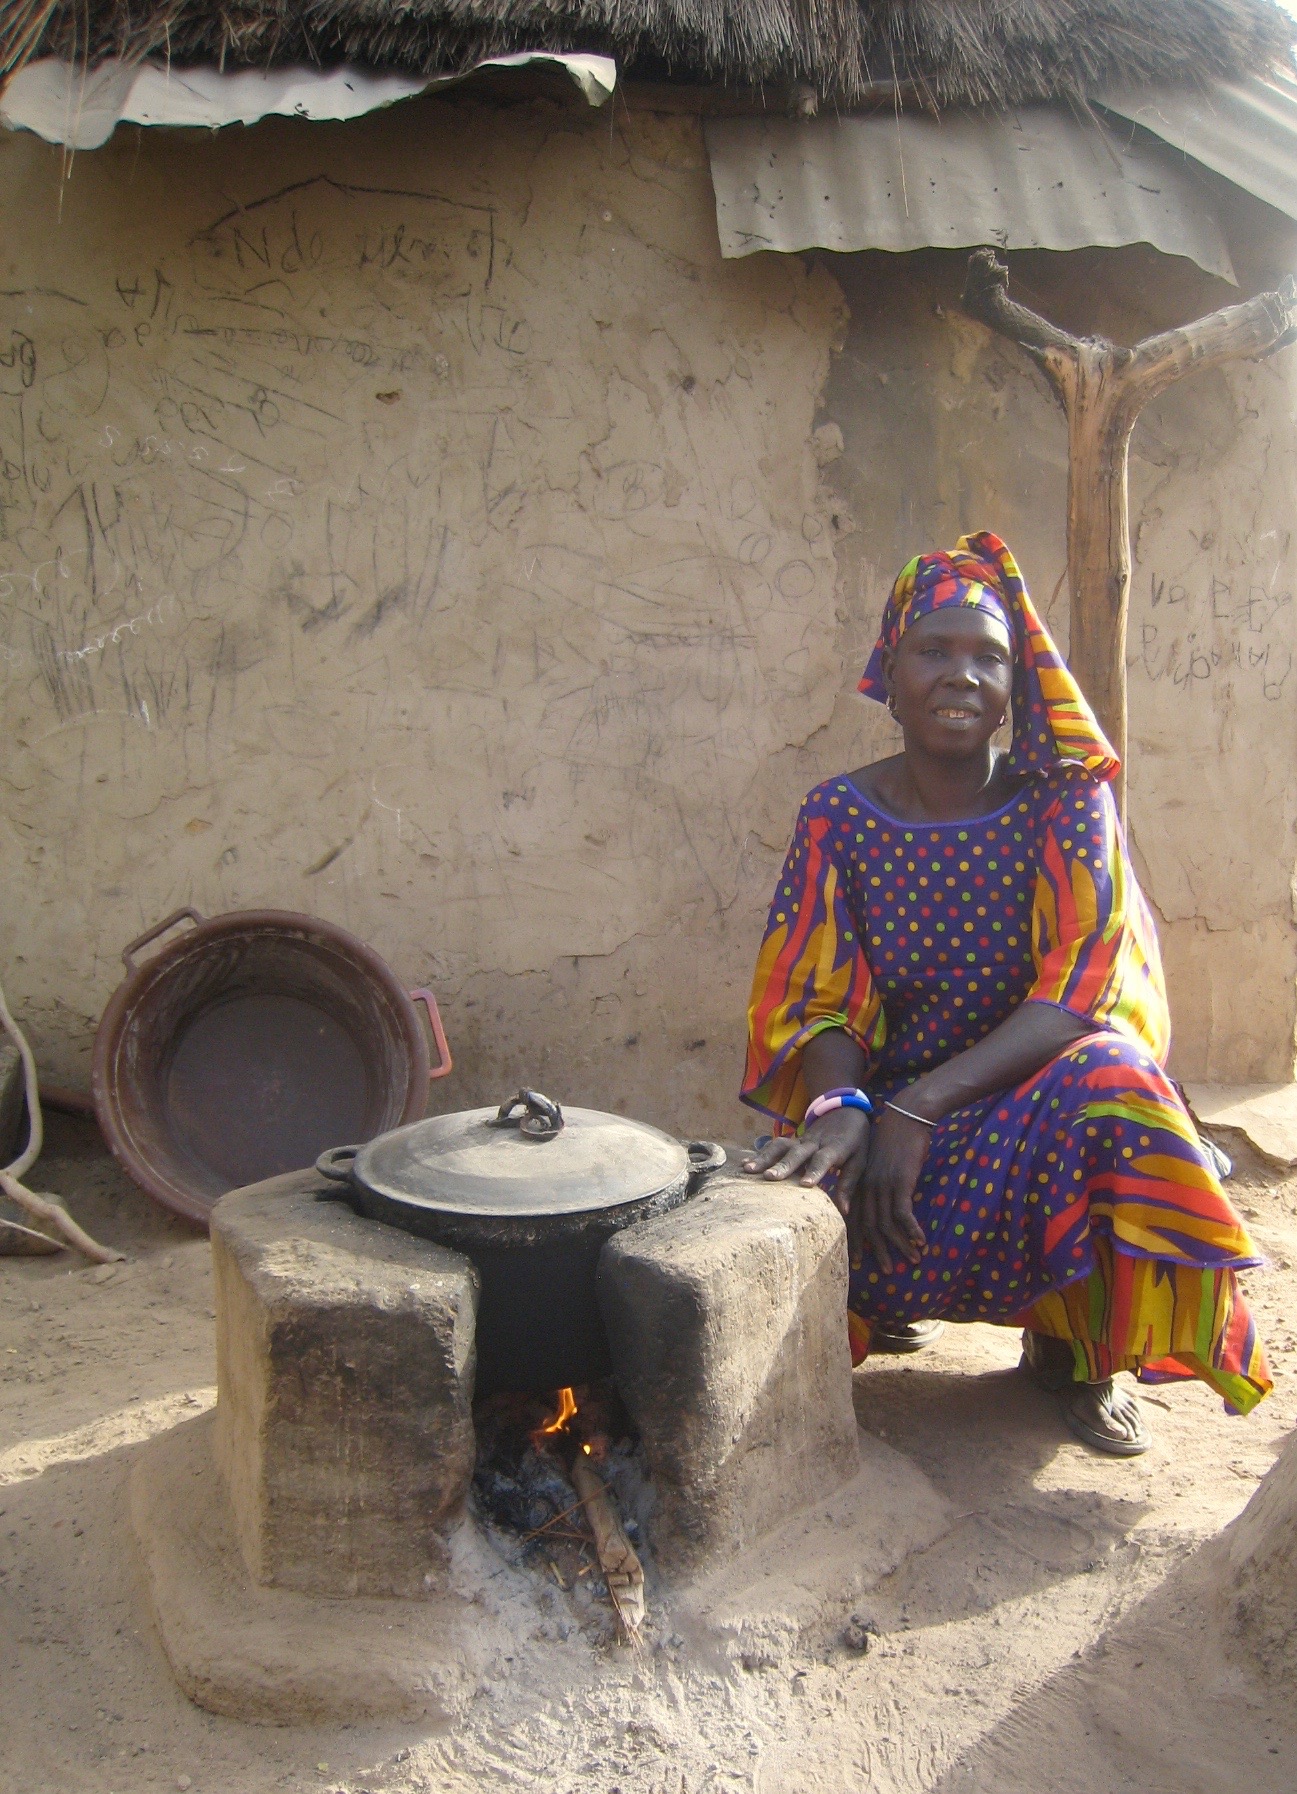 Nearly every home in Darou Diadji now has at least one well-constructed improved cookstove.